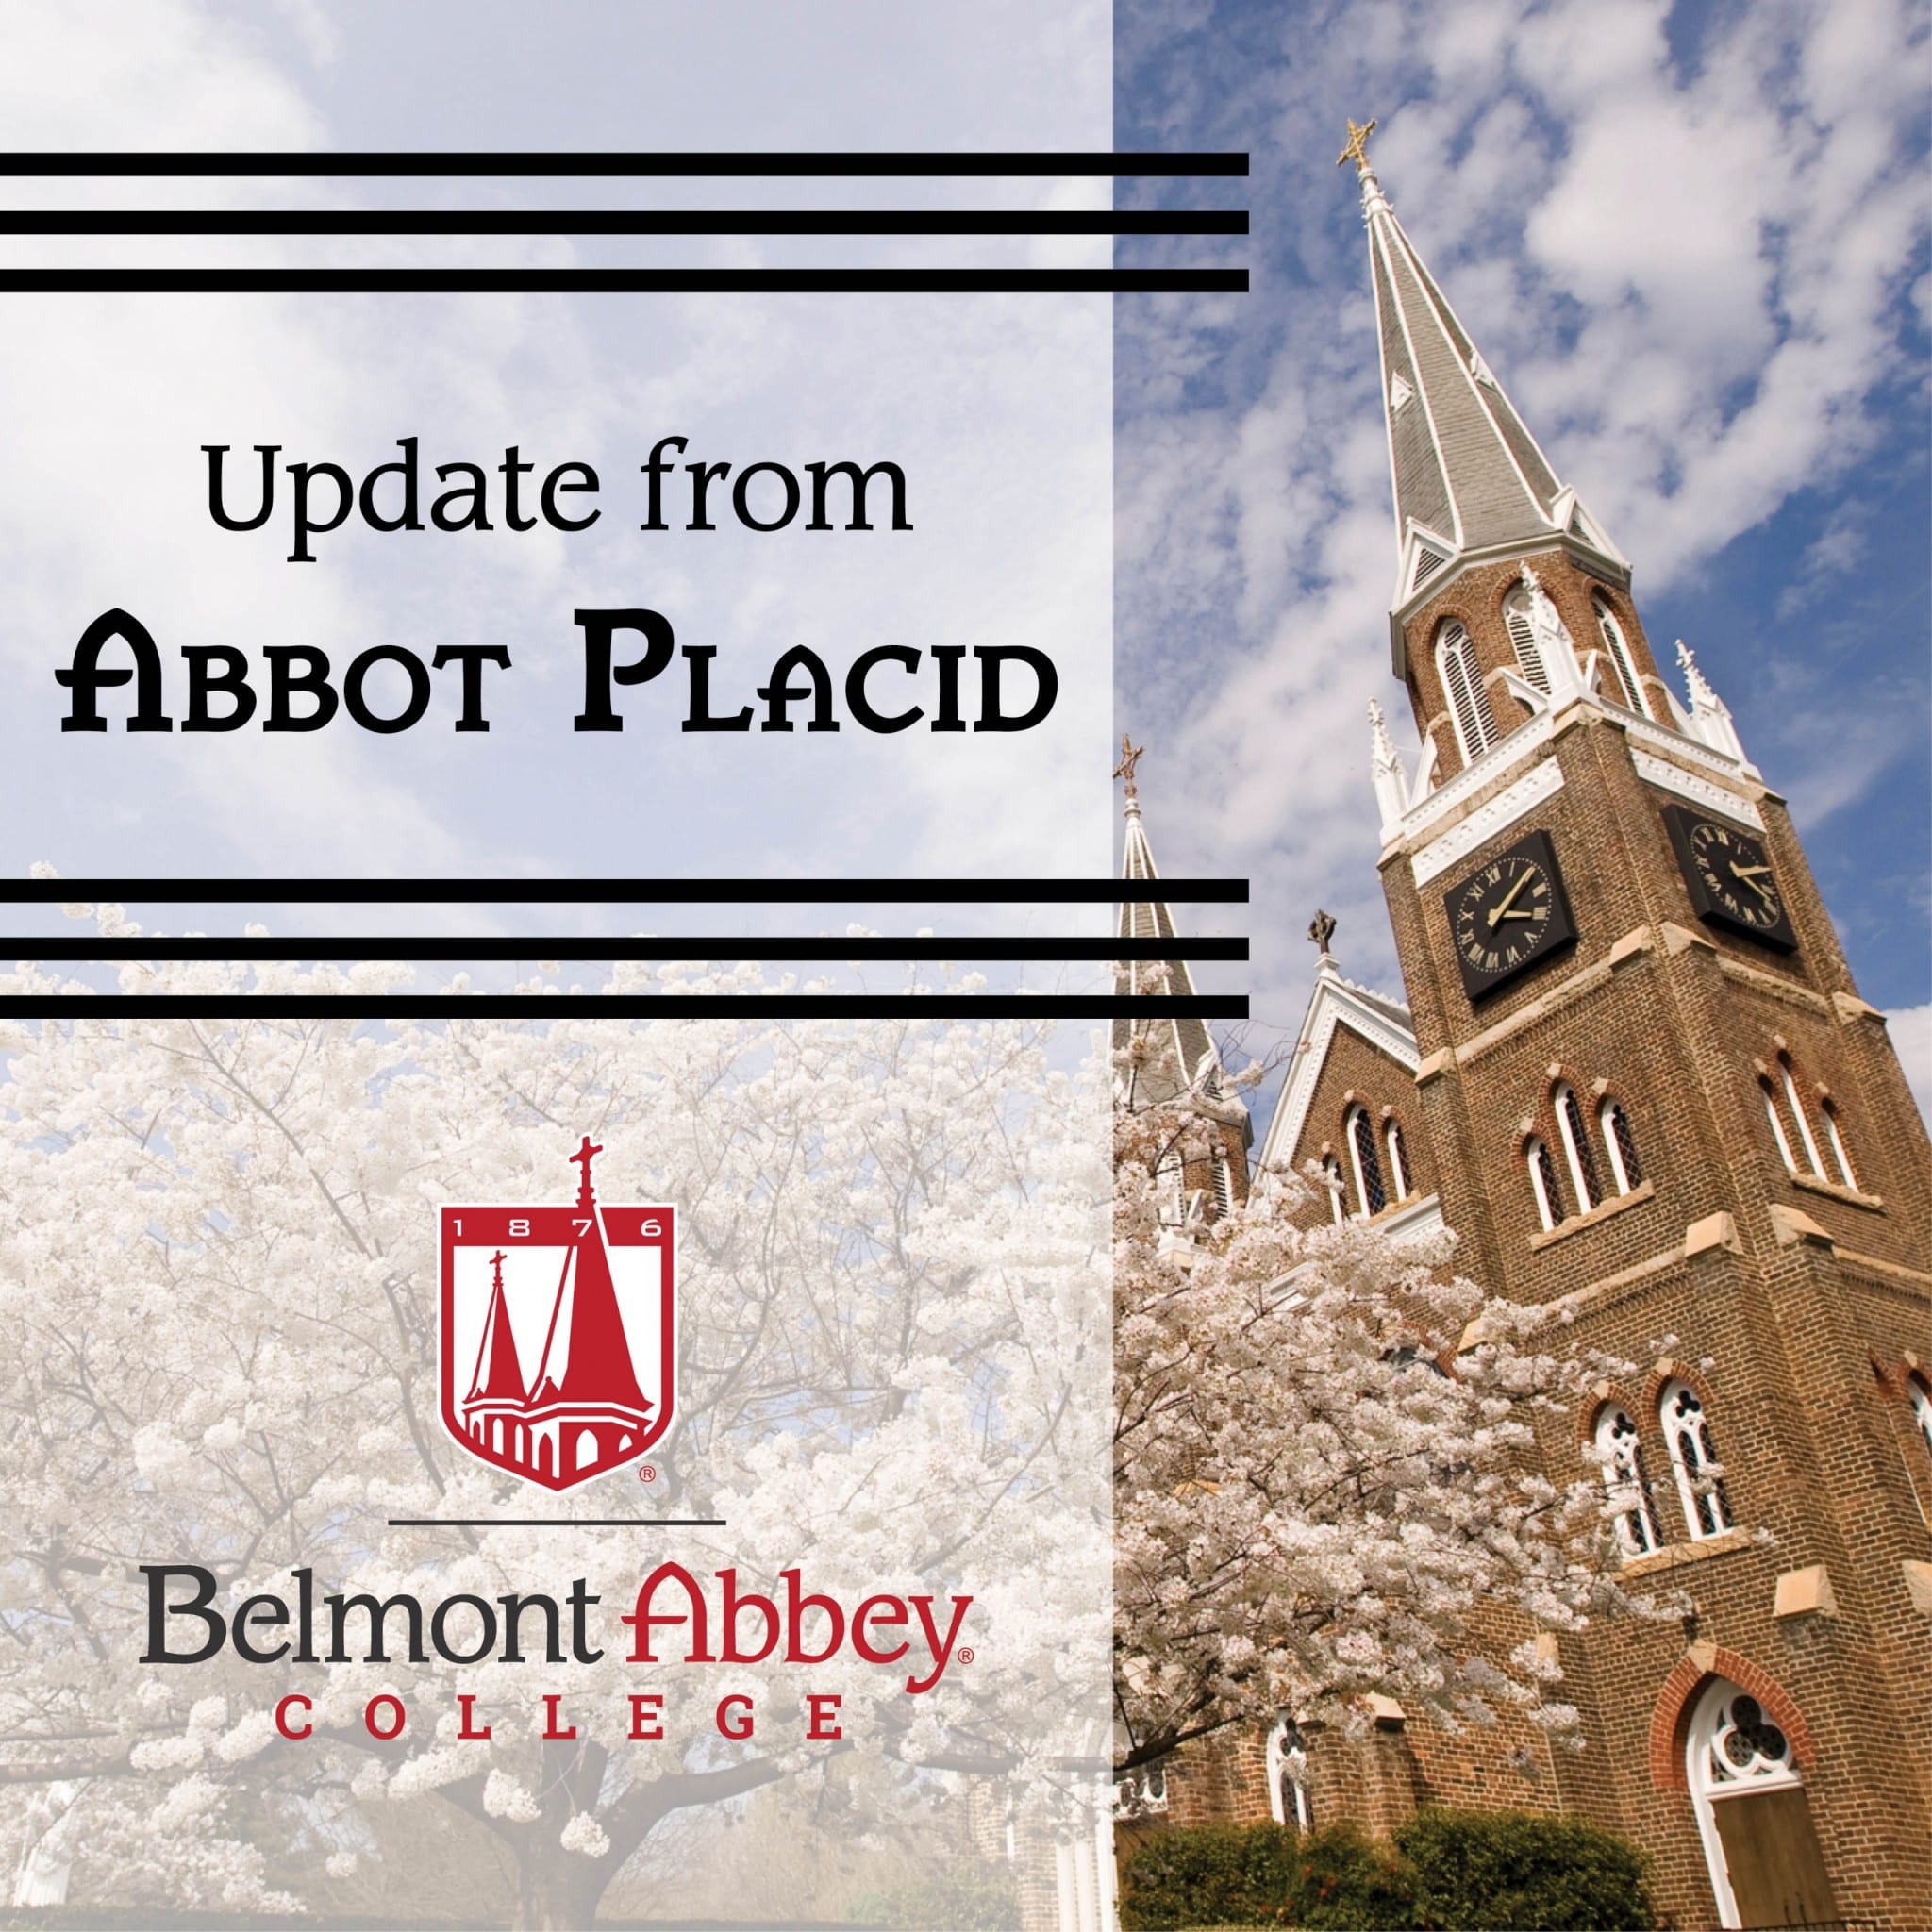 Updates from the Abbot